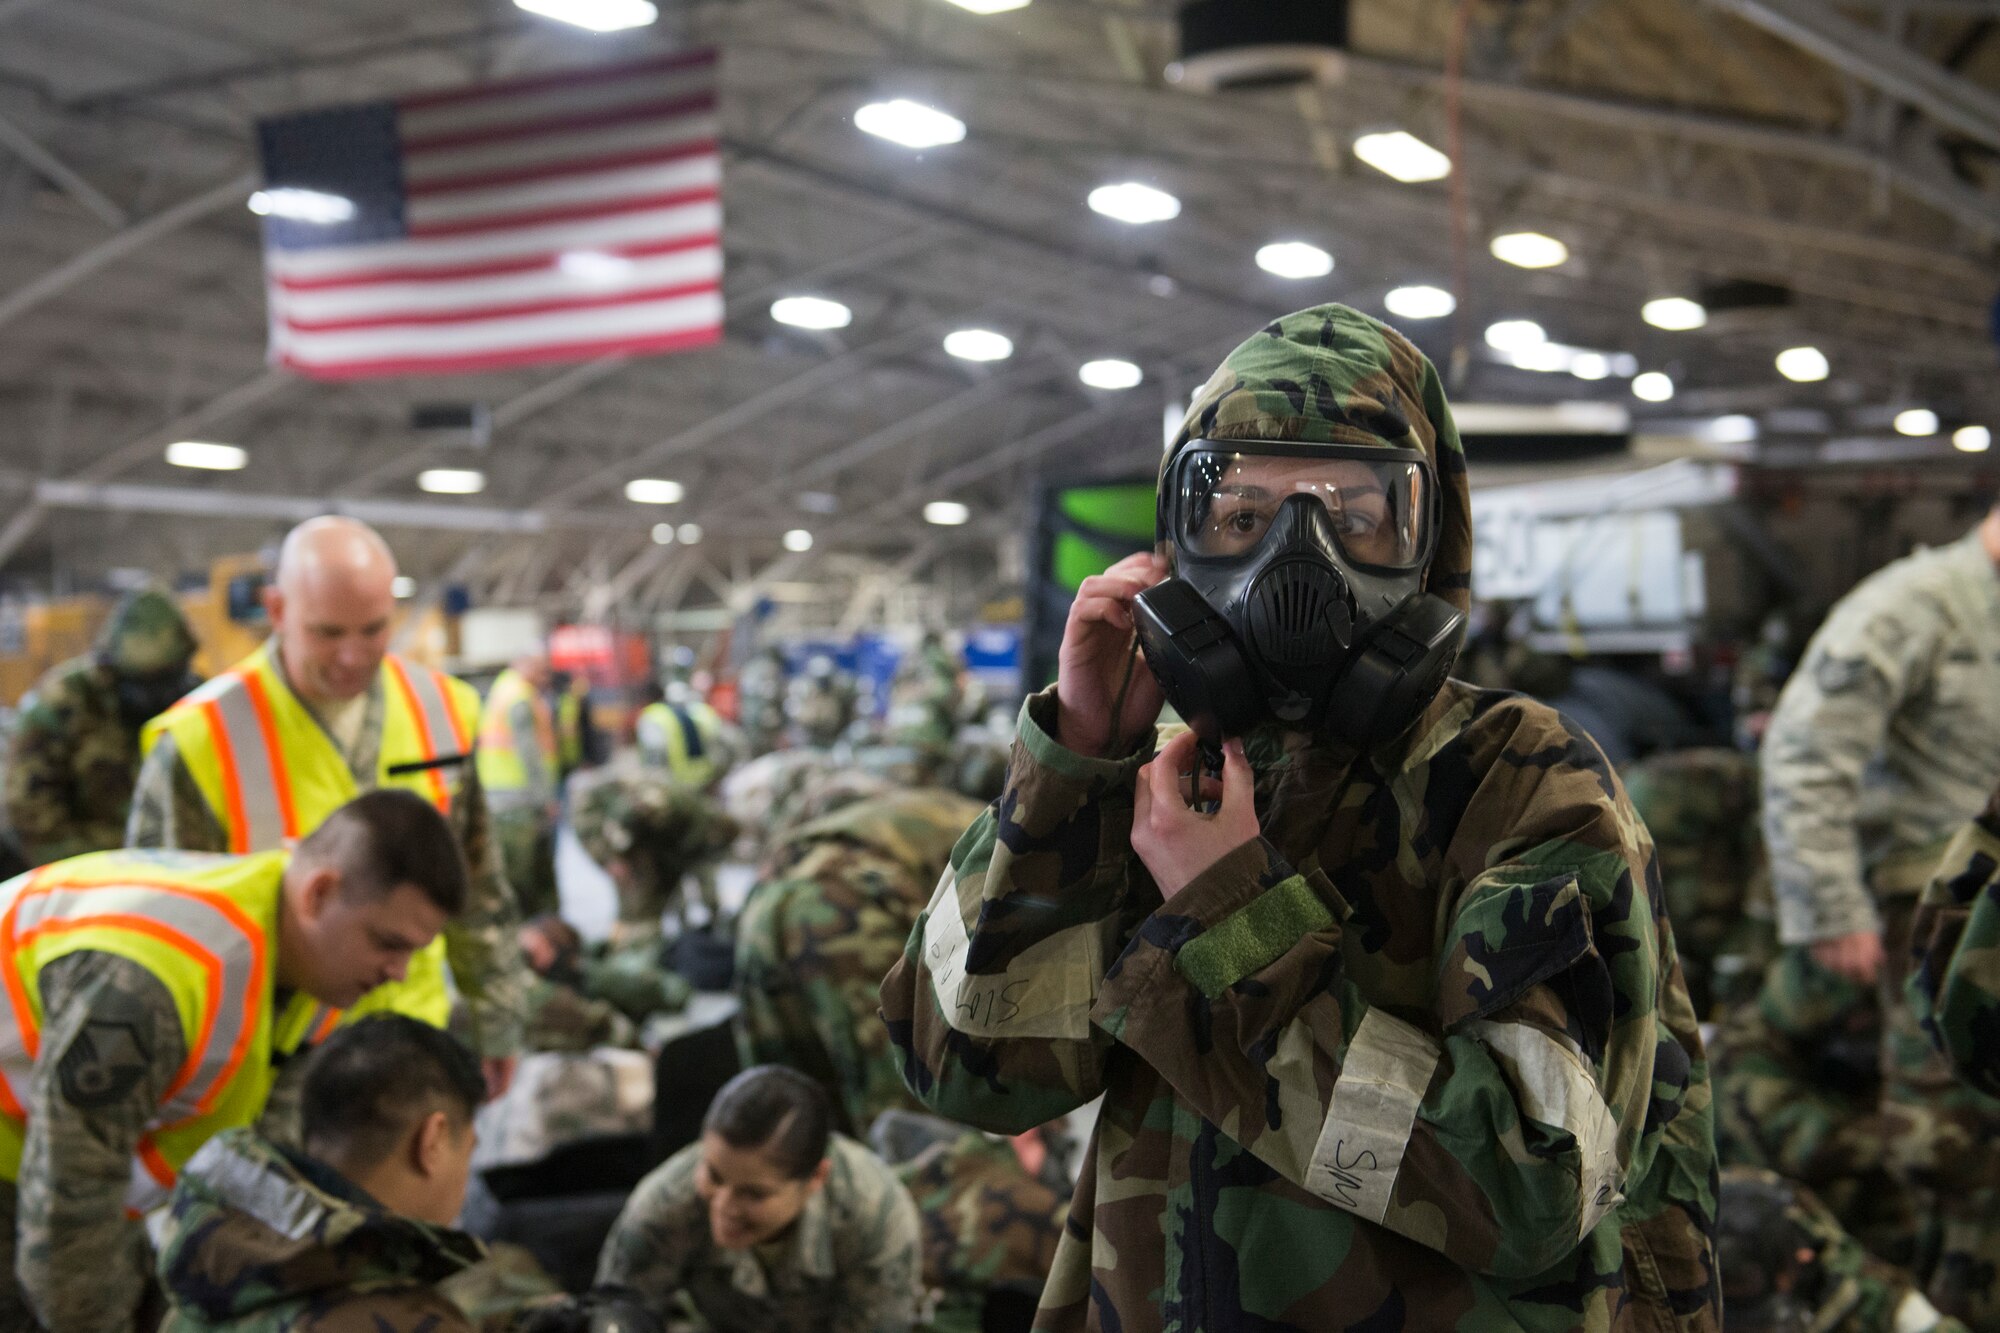 Senior Airman Stephanie Sochin, with the 773d Civil Engineer Squadron Operations Management, checks the seal on her protective mask during a chemical, biological, radiological and nuclear defense training Feb. 8, 2018, at Joint Base Elmendorf-Richardson, Alaska. CBRN defense training was incorporated into the 673d Civil Engineer Group, Prime Base Engineer Emergency Force monthly training to maintain a readiness posture that enables them to execute a variety of operations in austere environments at a moment’s notice.